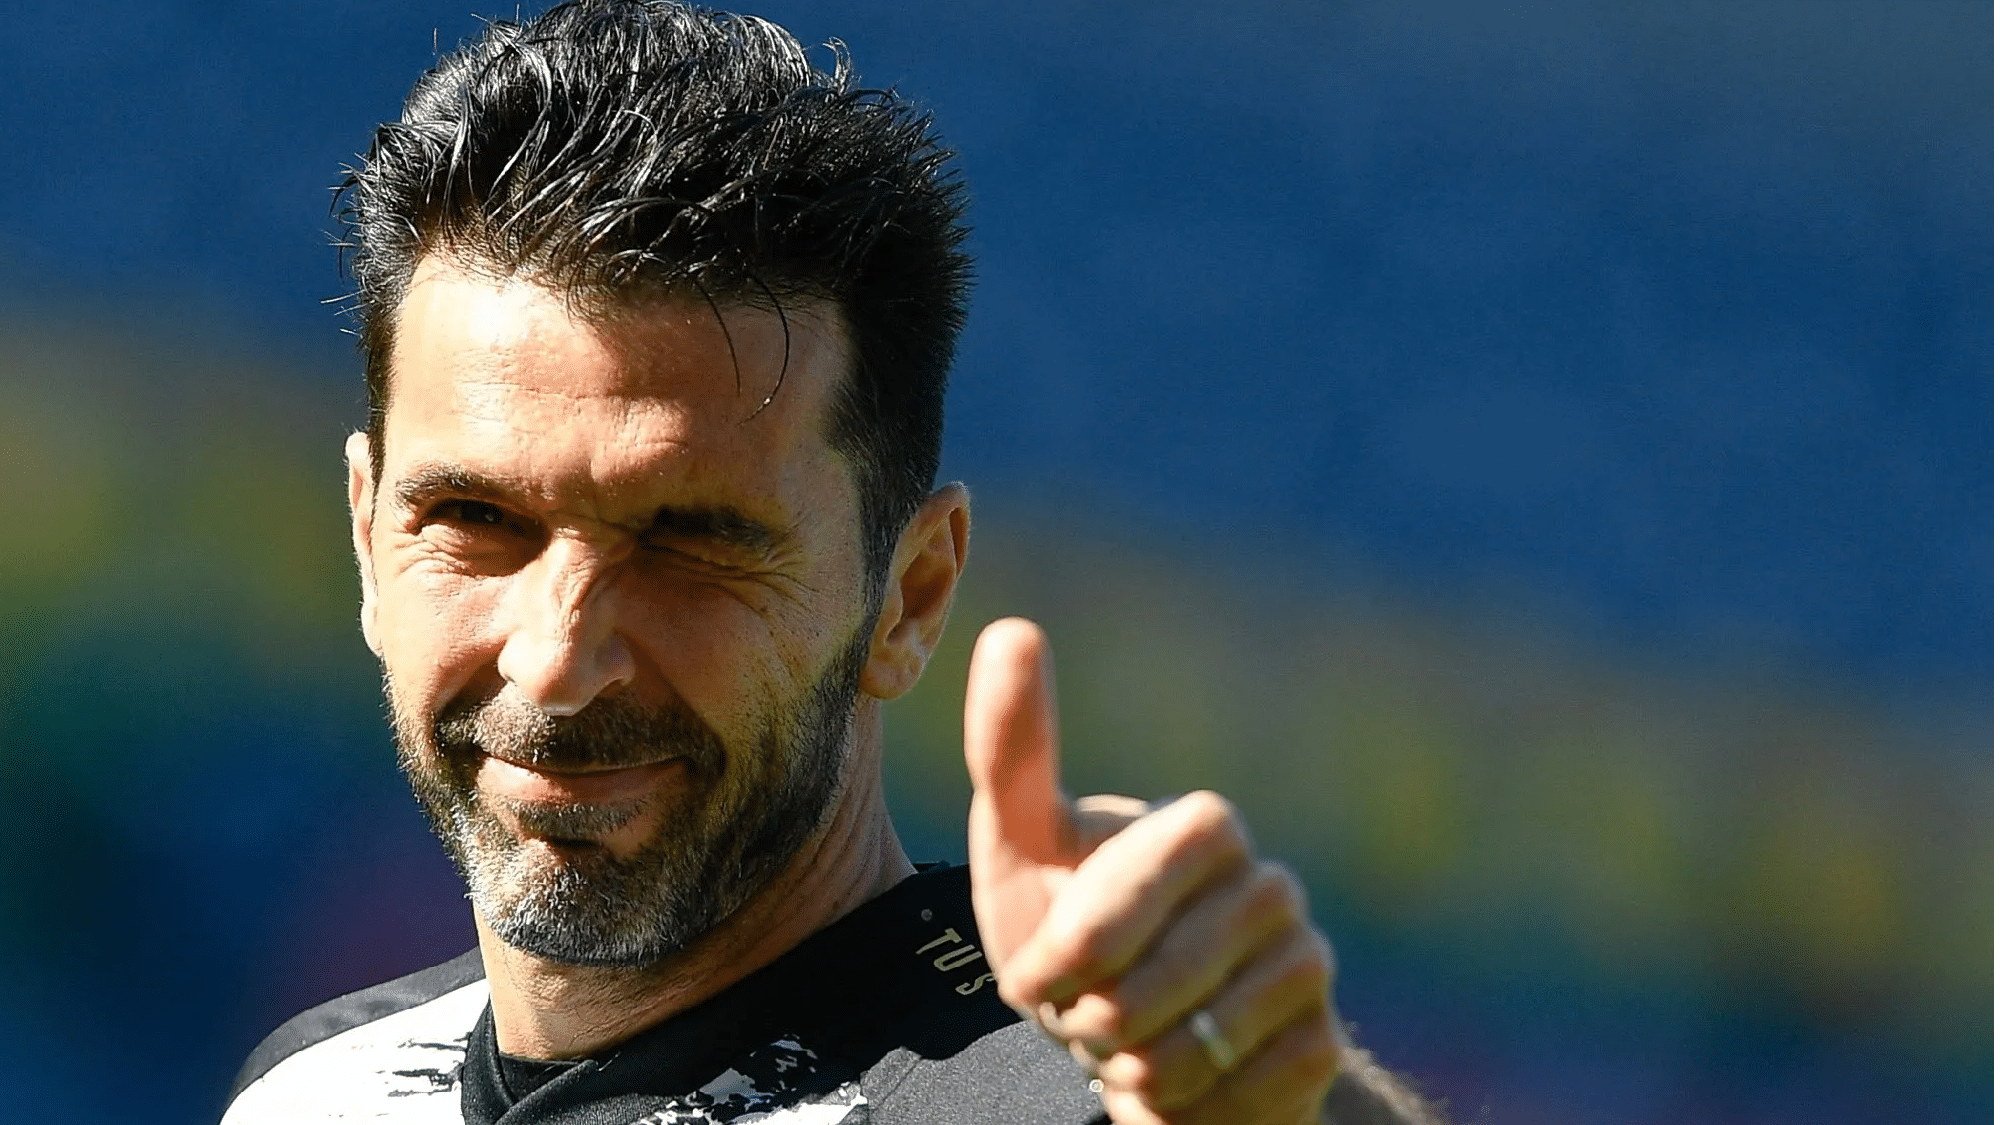 ‘Superman’ Gianluigi Buffon returns to relegated Parma after two decades